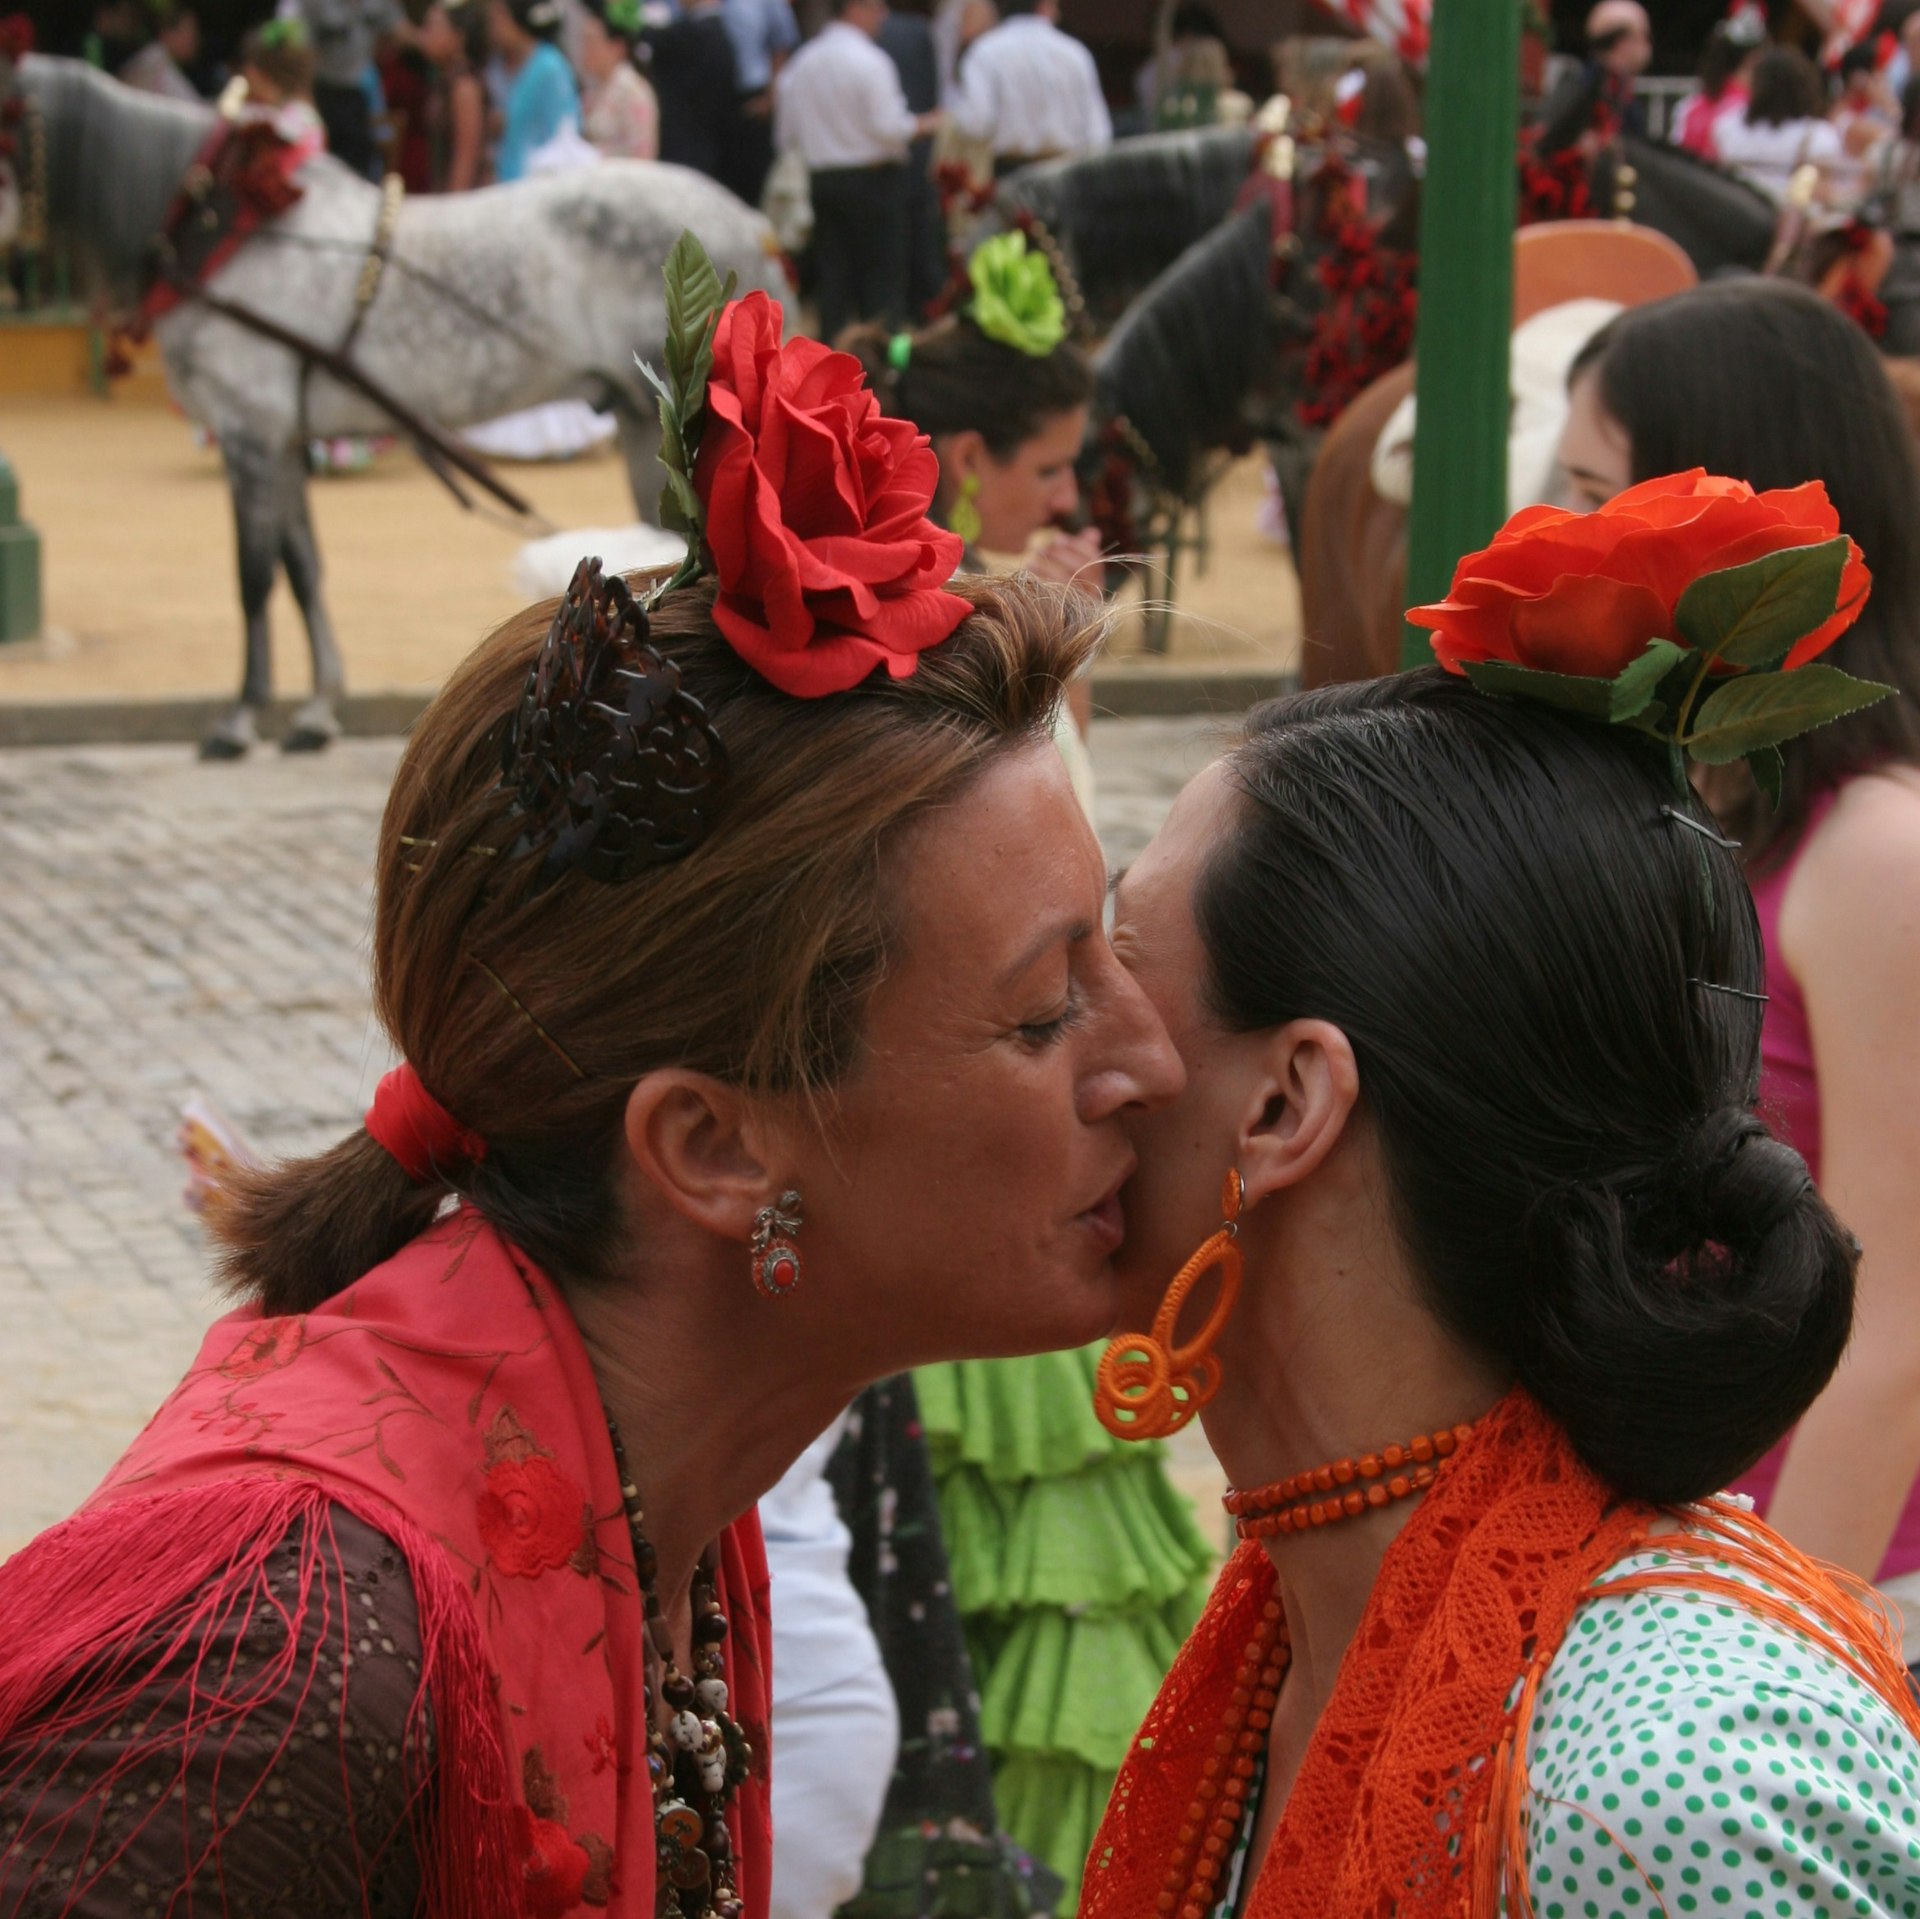 Two women in red millinery kissing at a street festival in Seville, Spain